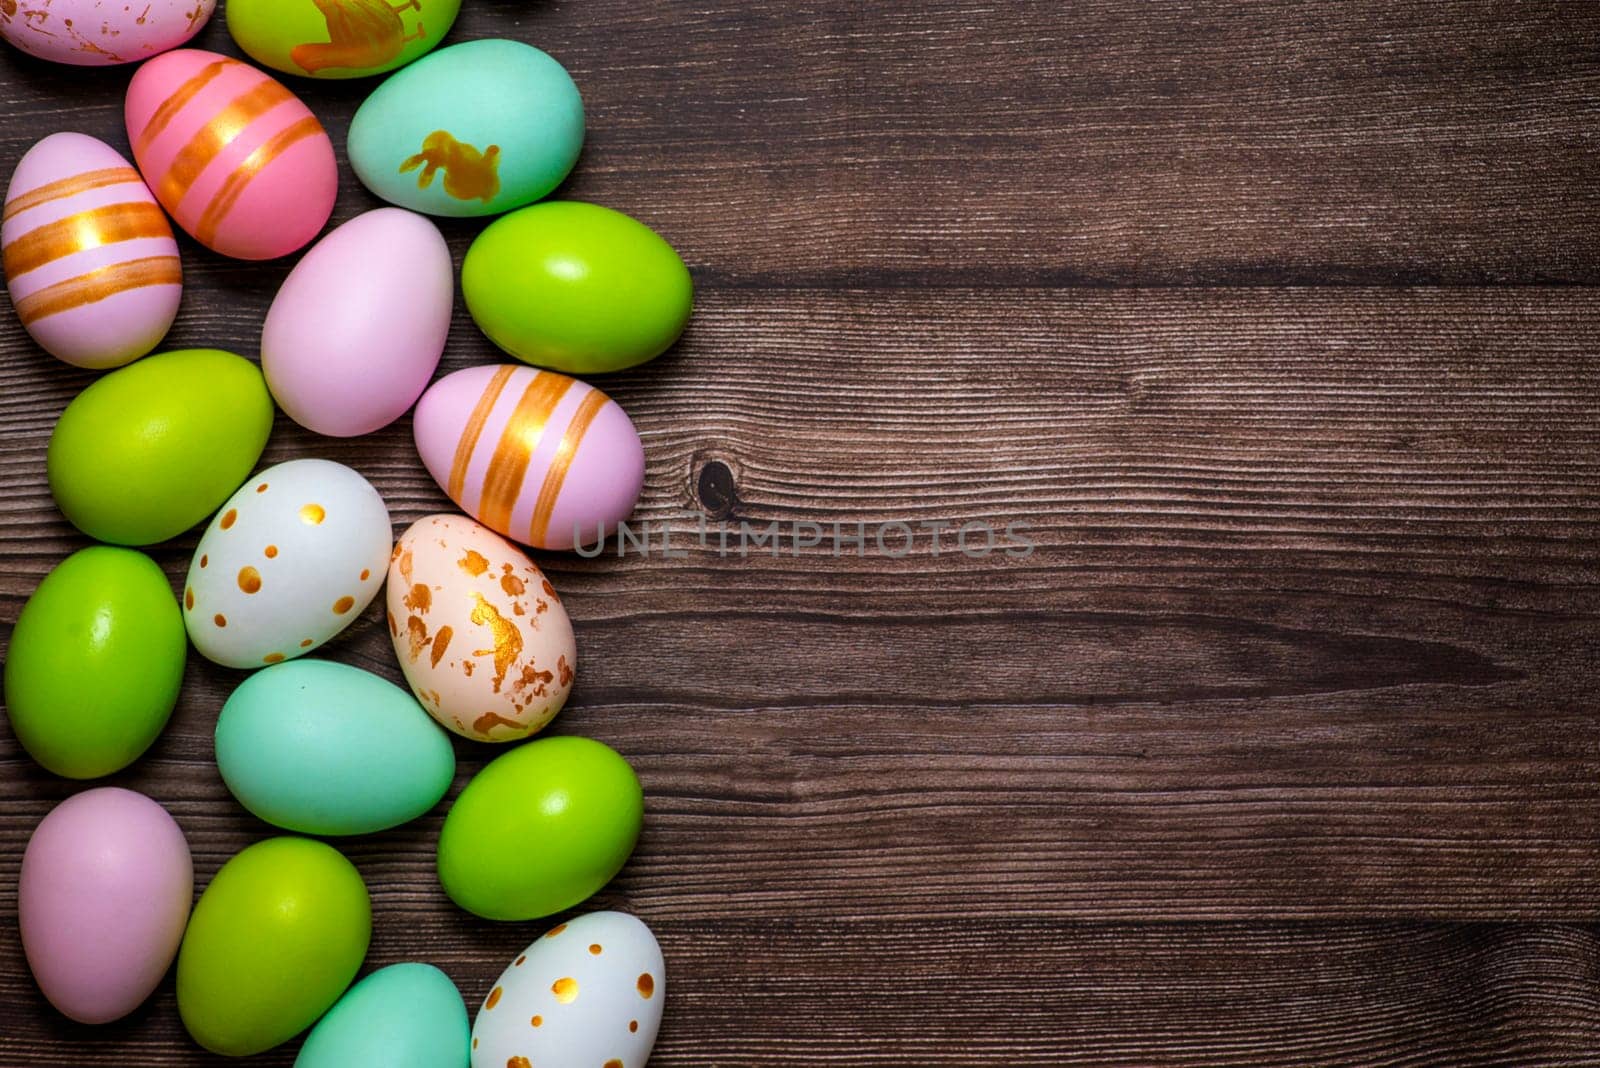 Easter eggs on wooden background. Colorful Easter eggs on a wooden background of boards.